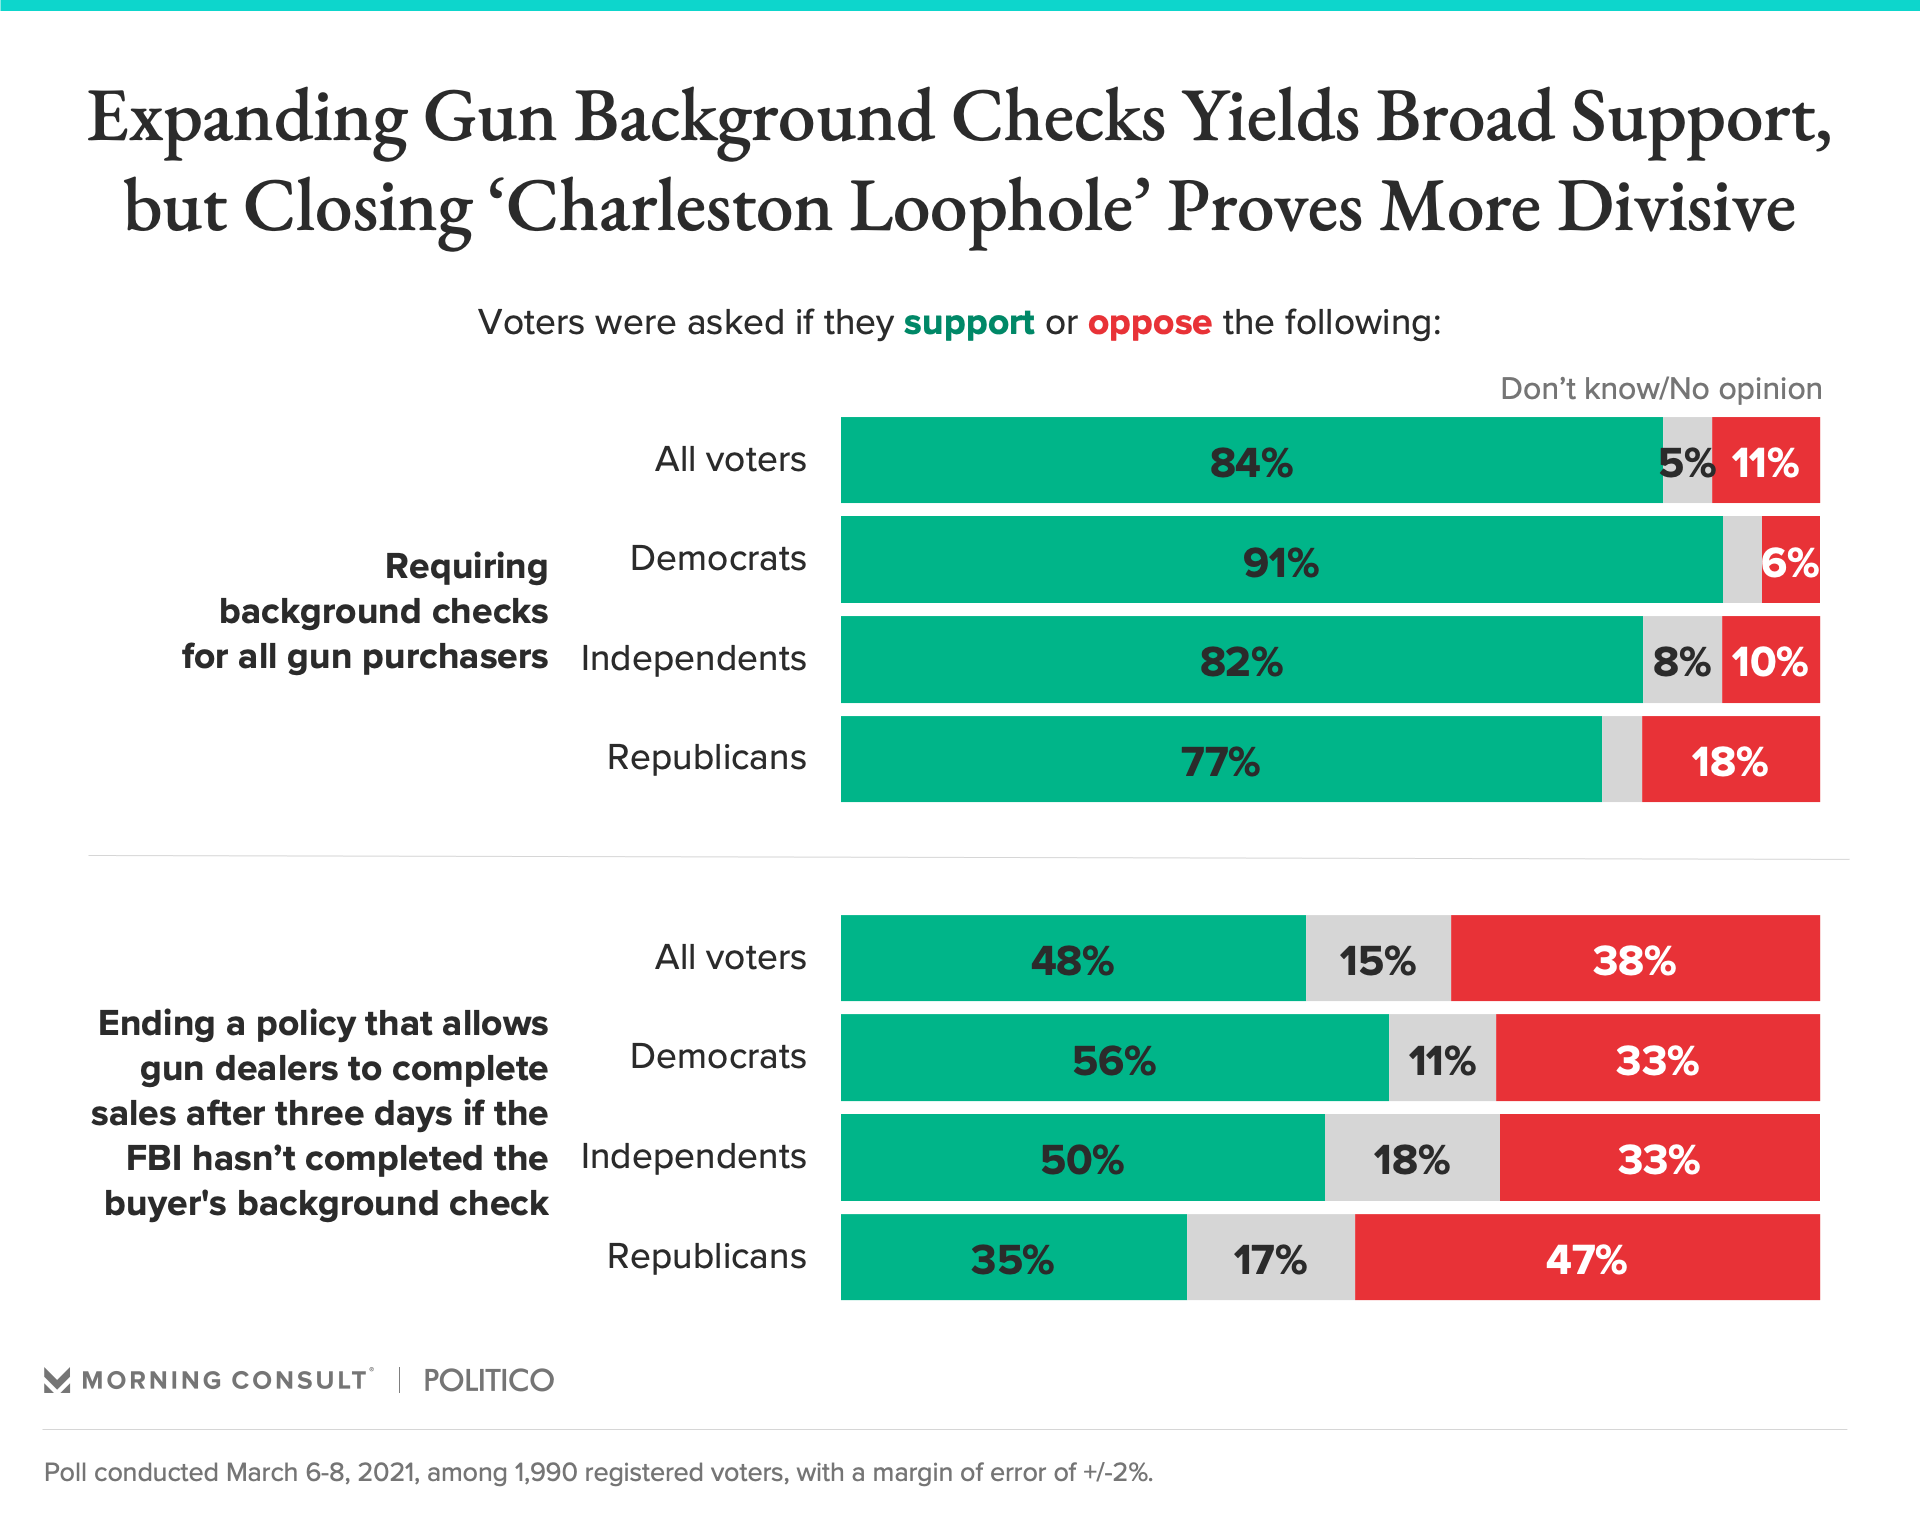 210309_Background-Checks-Polling_FULLWIDTH.png